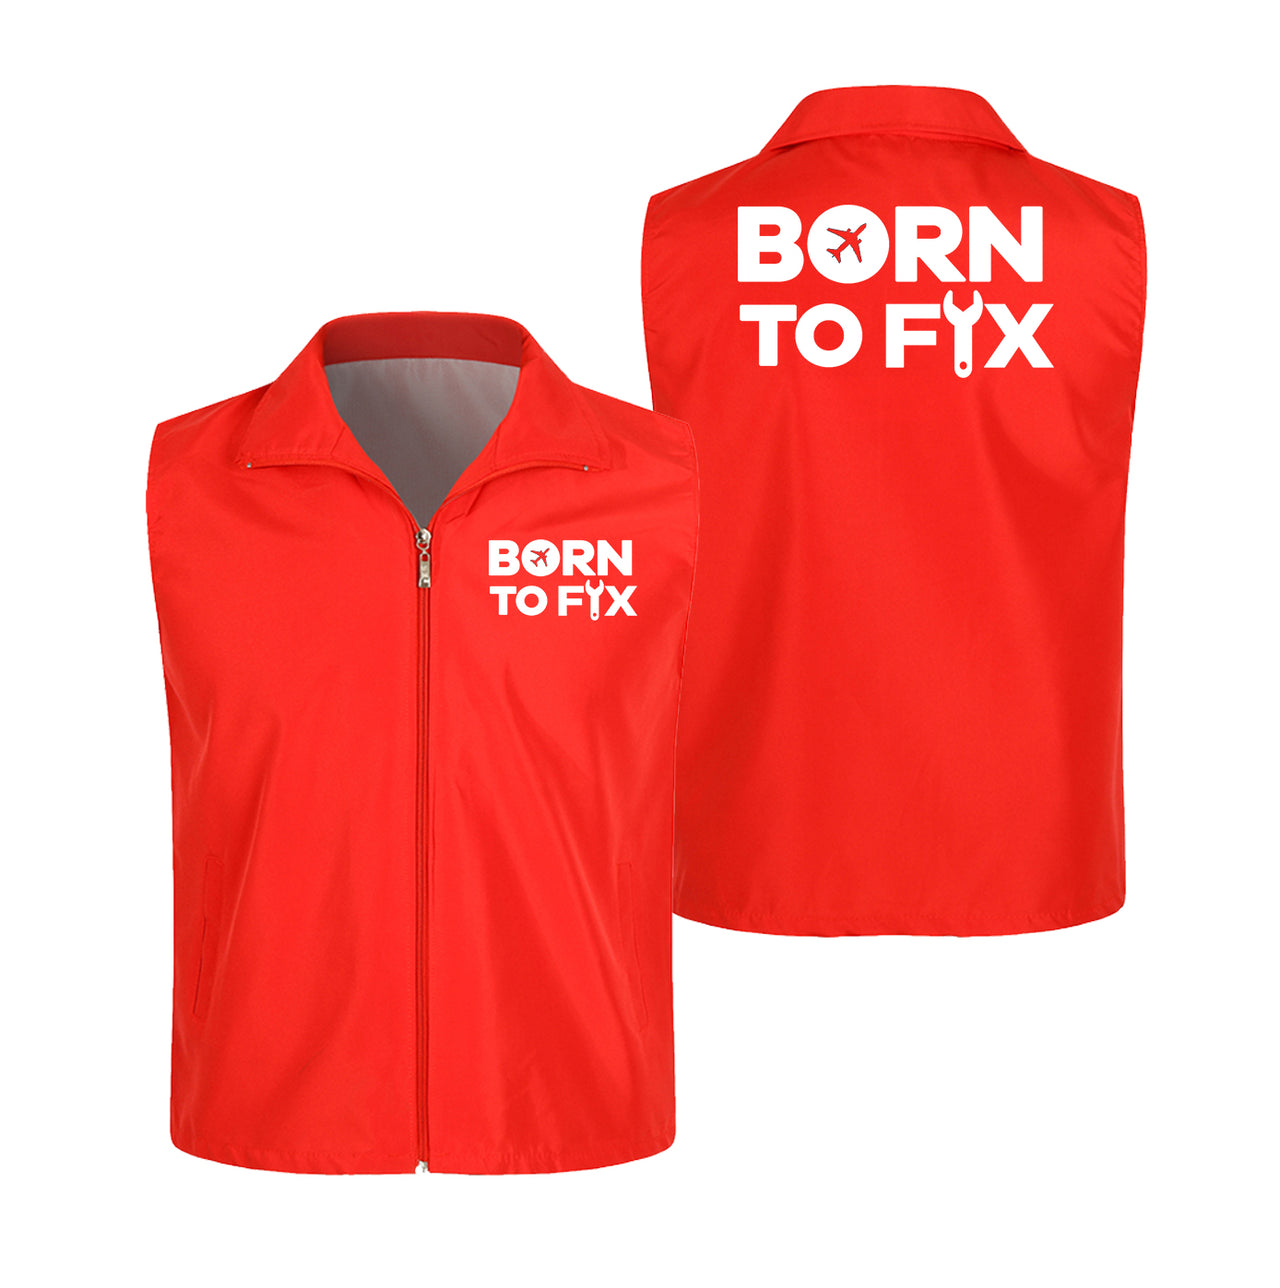 Born To Fix Airplanes Designed Thin Style Vests